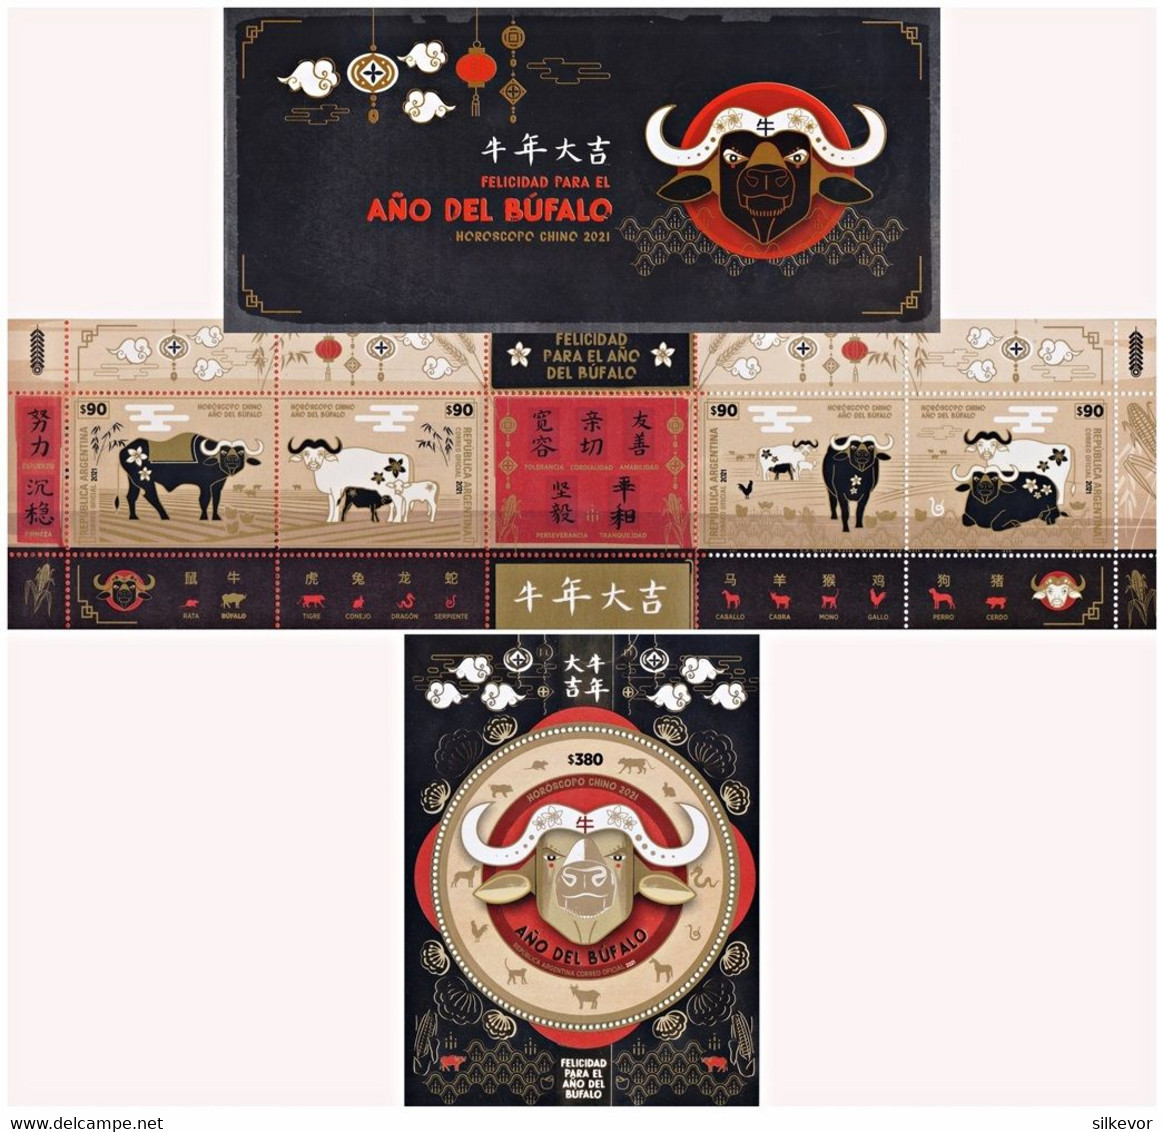 ARGENTINA-2021-STAMPS-YEAR OF THE BUFALO-CHINESE HOROSCOPE- BOOKLET + SOUVENIR SHEET-MNH- SEE IMAGE!! - Nuovi